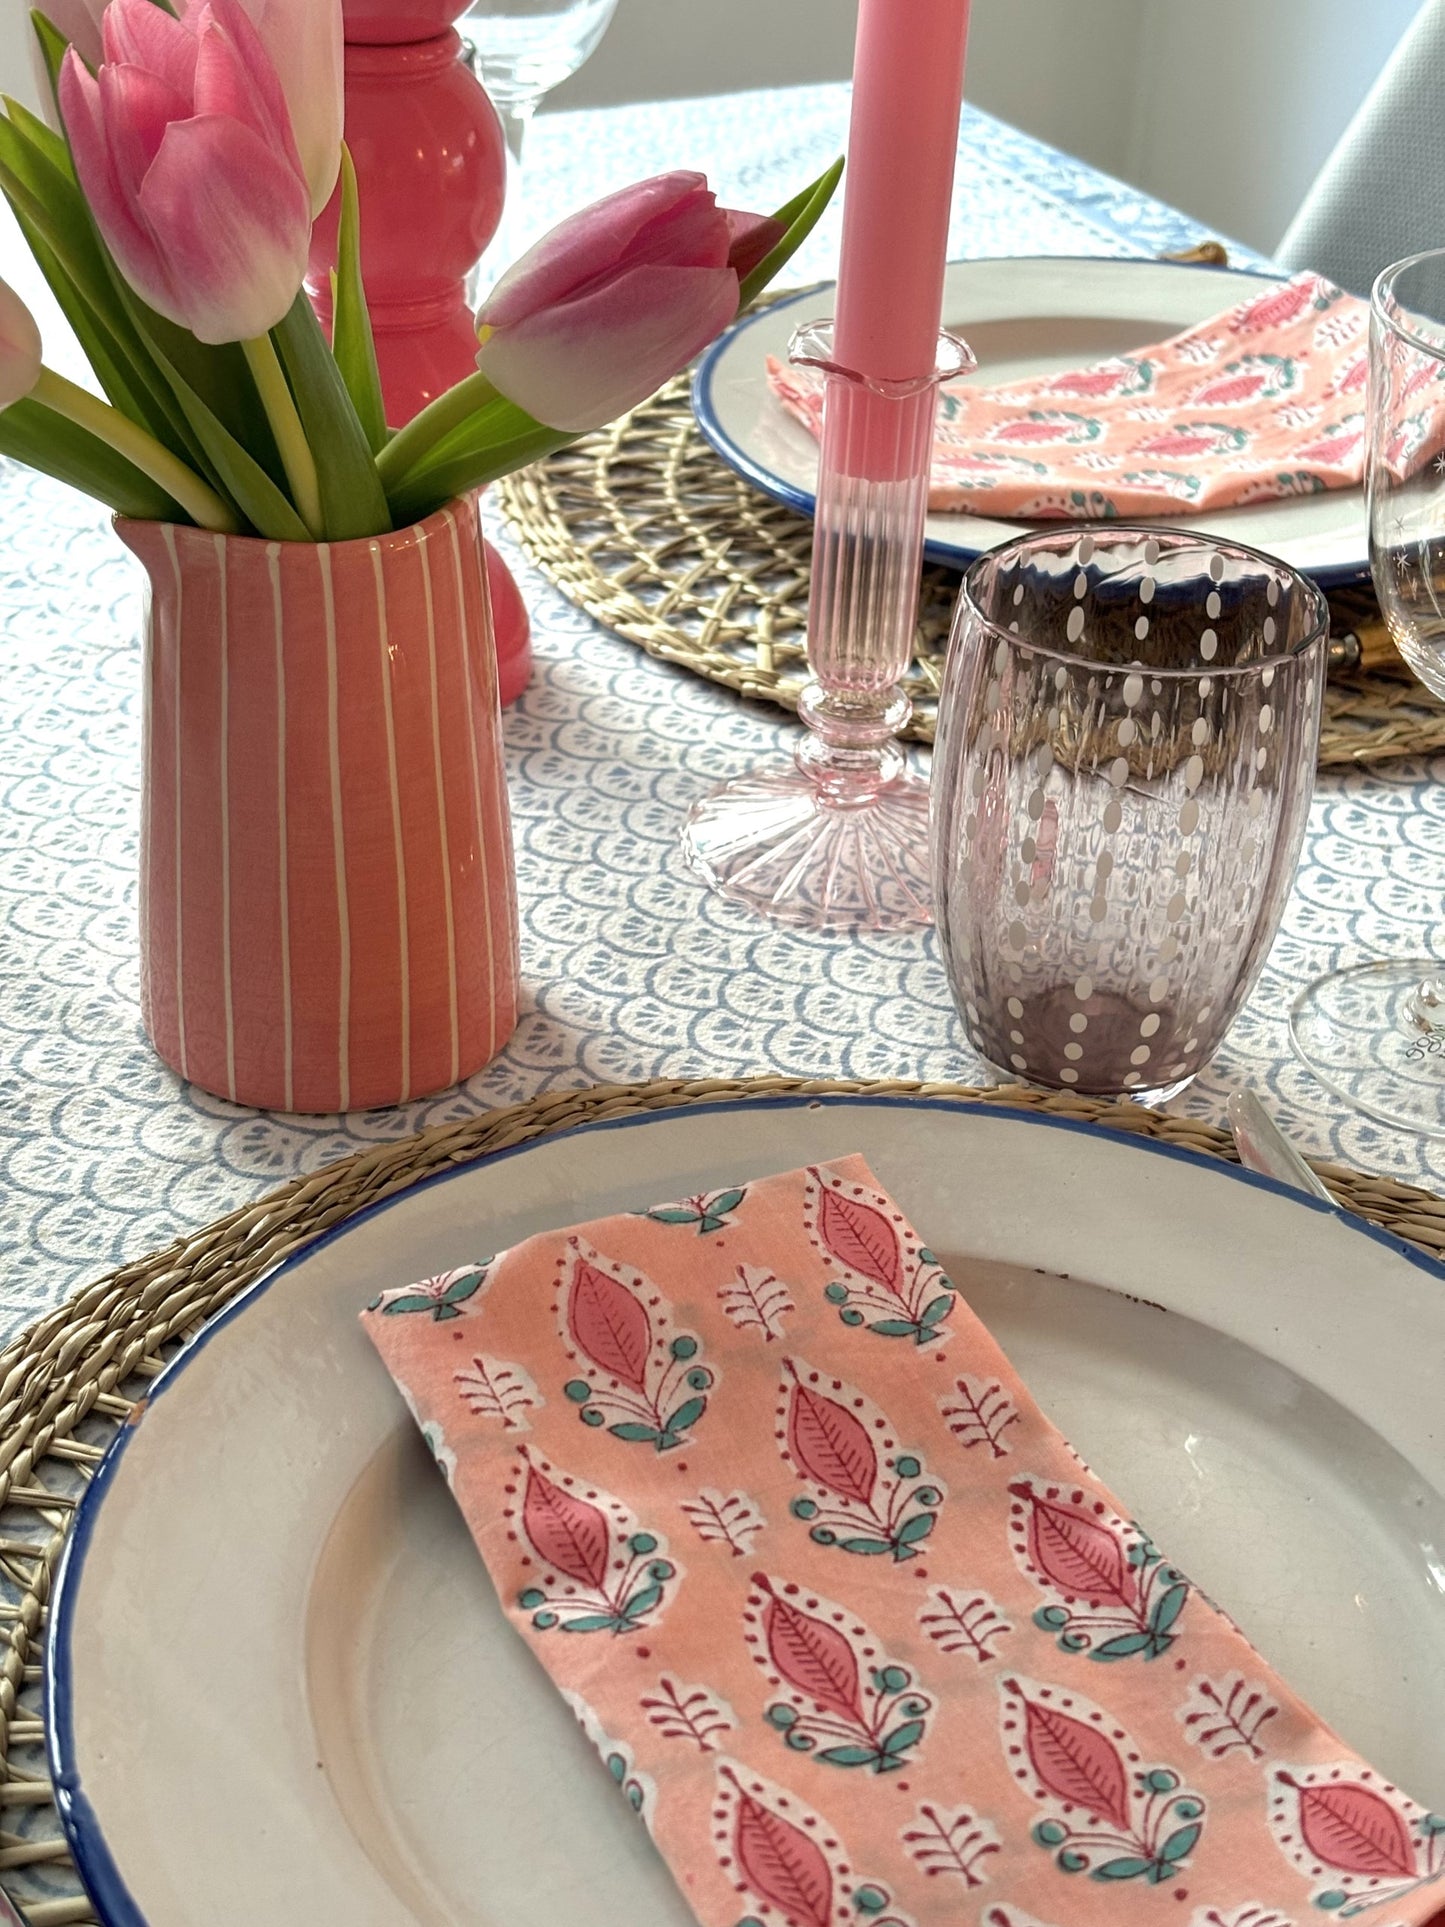 A close up of a pink and blue table setting with a pink jug of tulips, pink candles and block printed napkins.